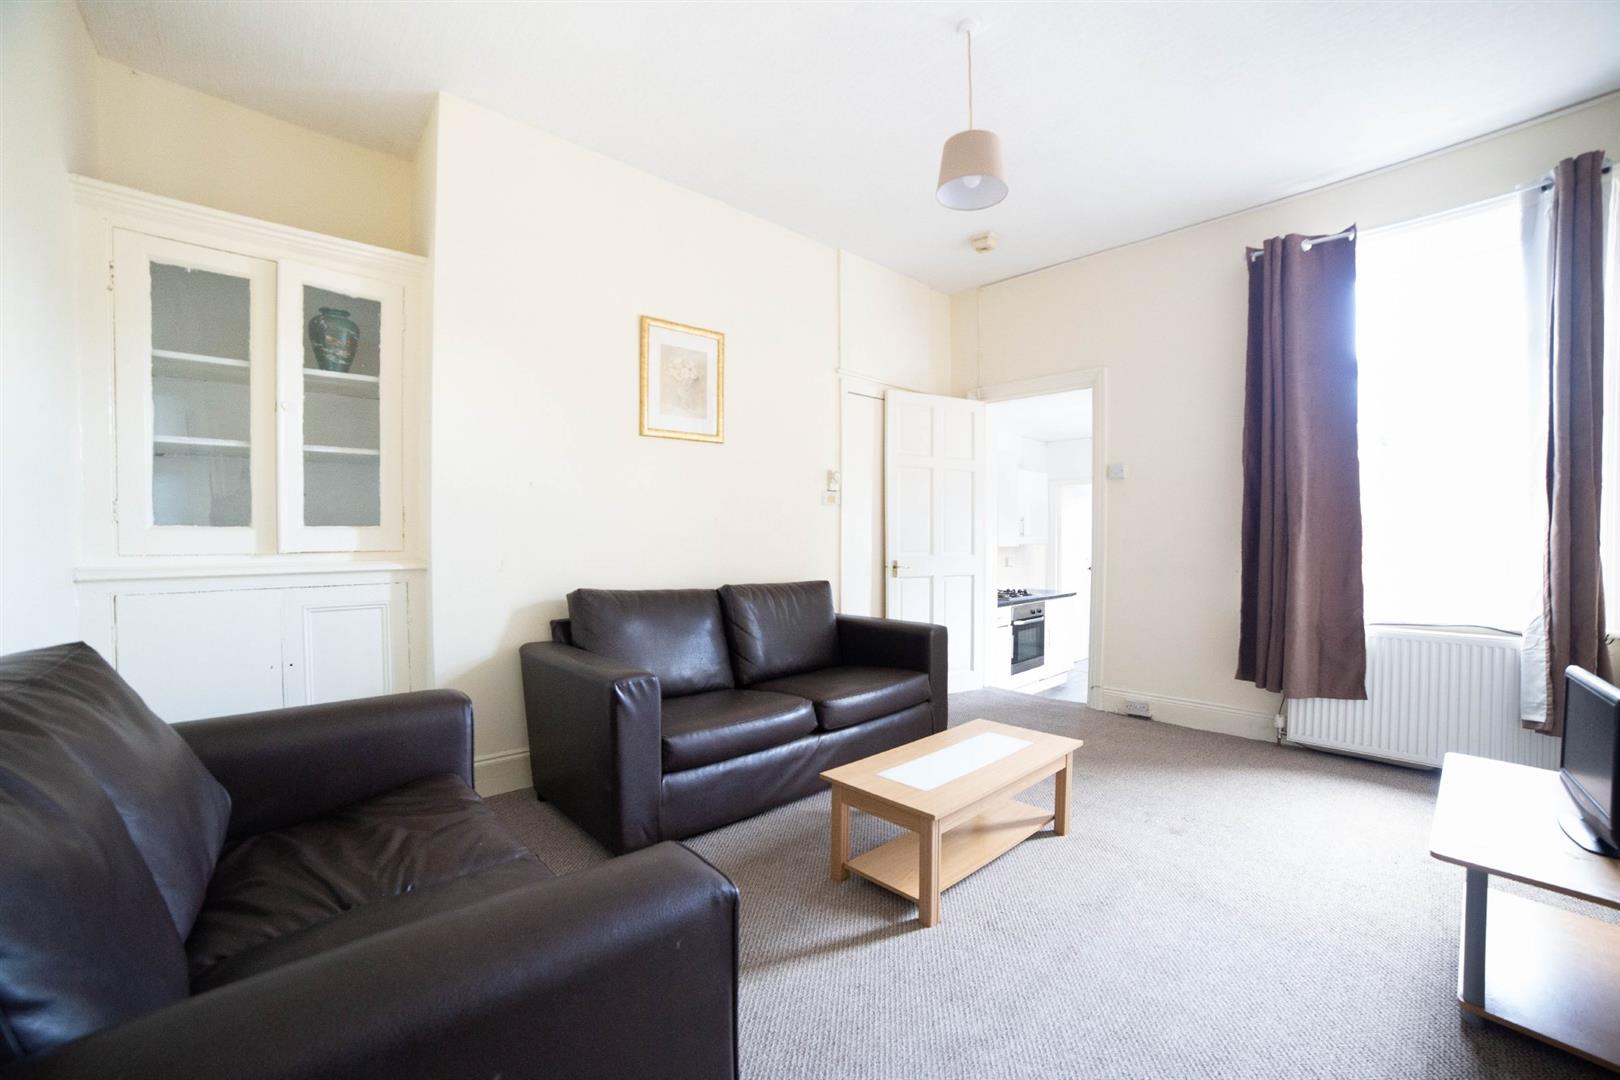 2 bed flat to rent in Rothbury Terrace, Newcastle Upon Tyne, NE6 